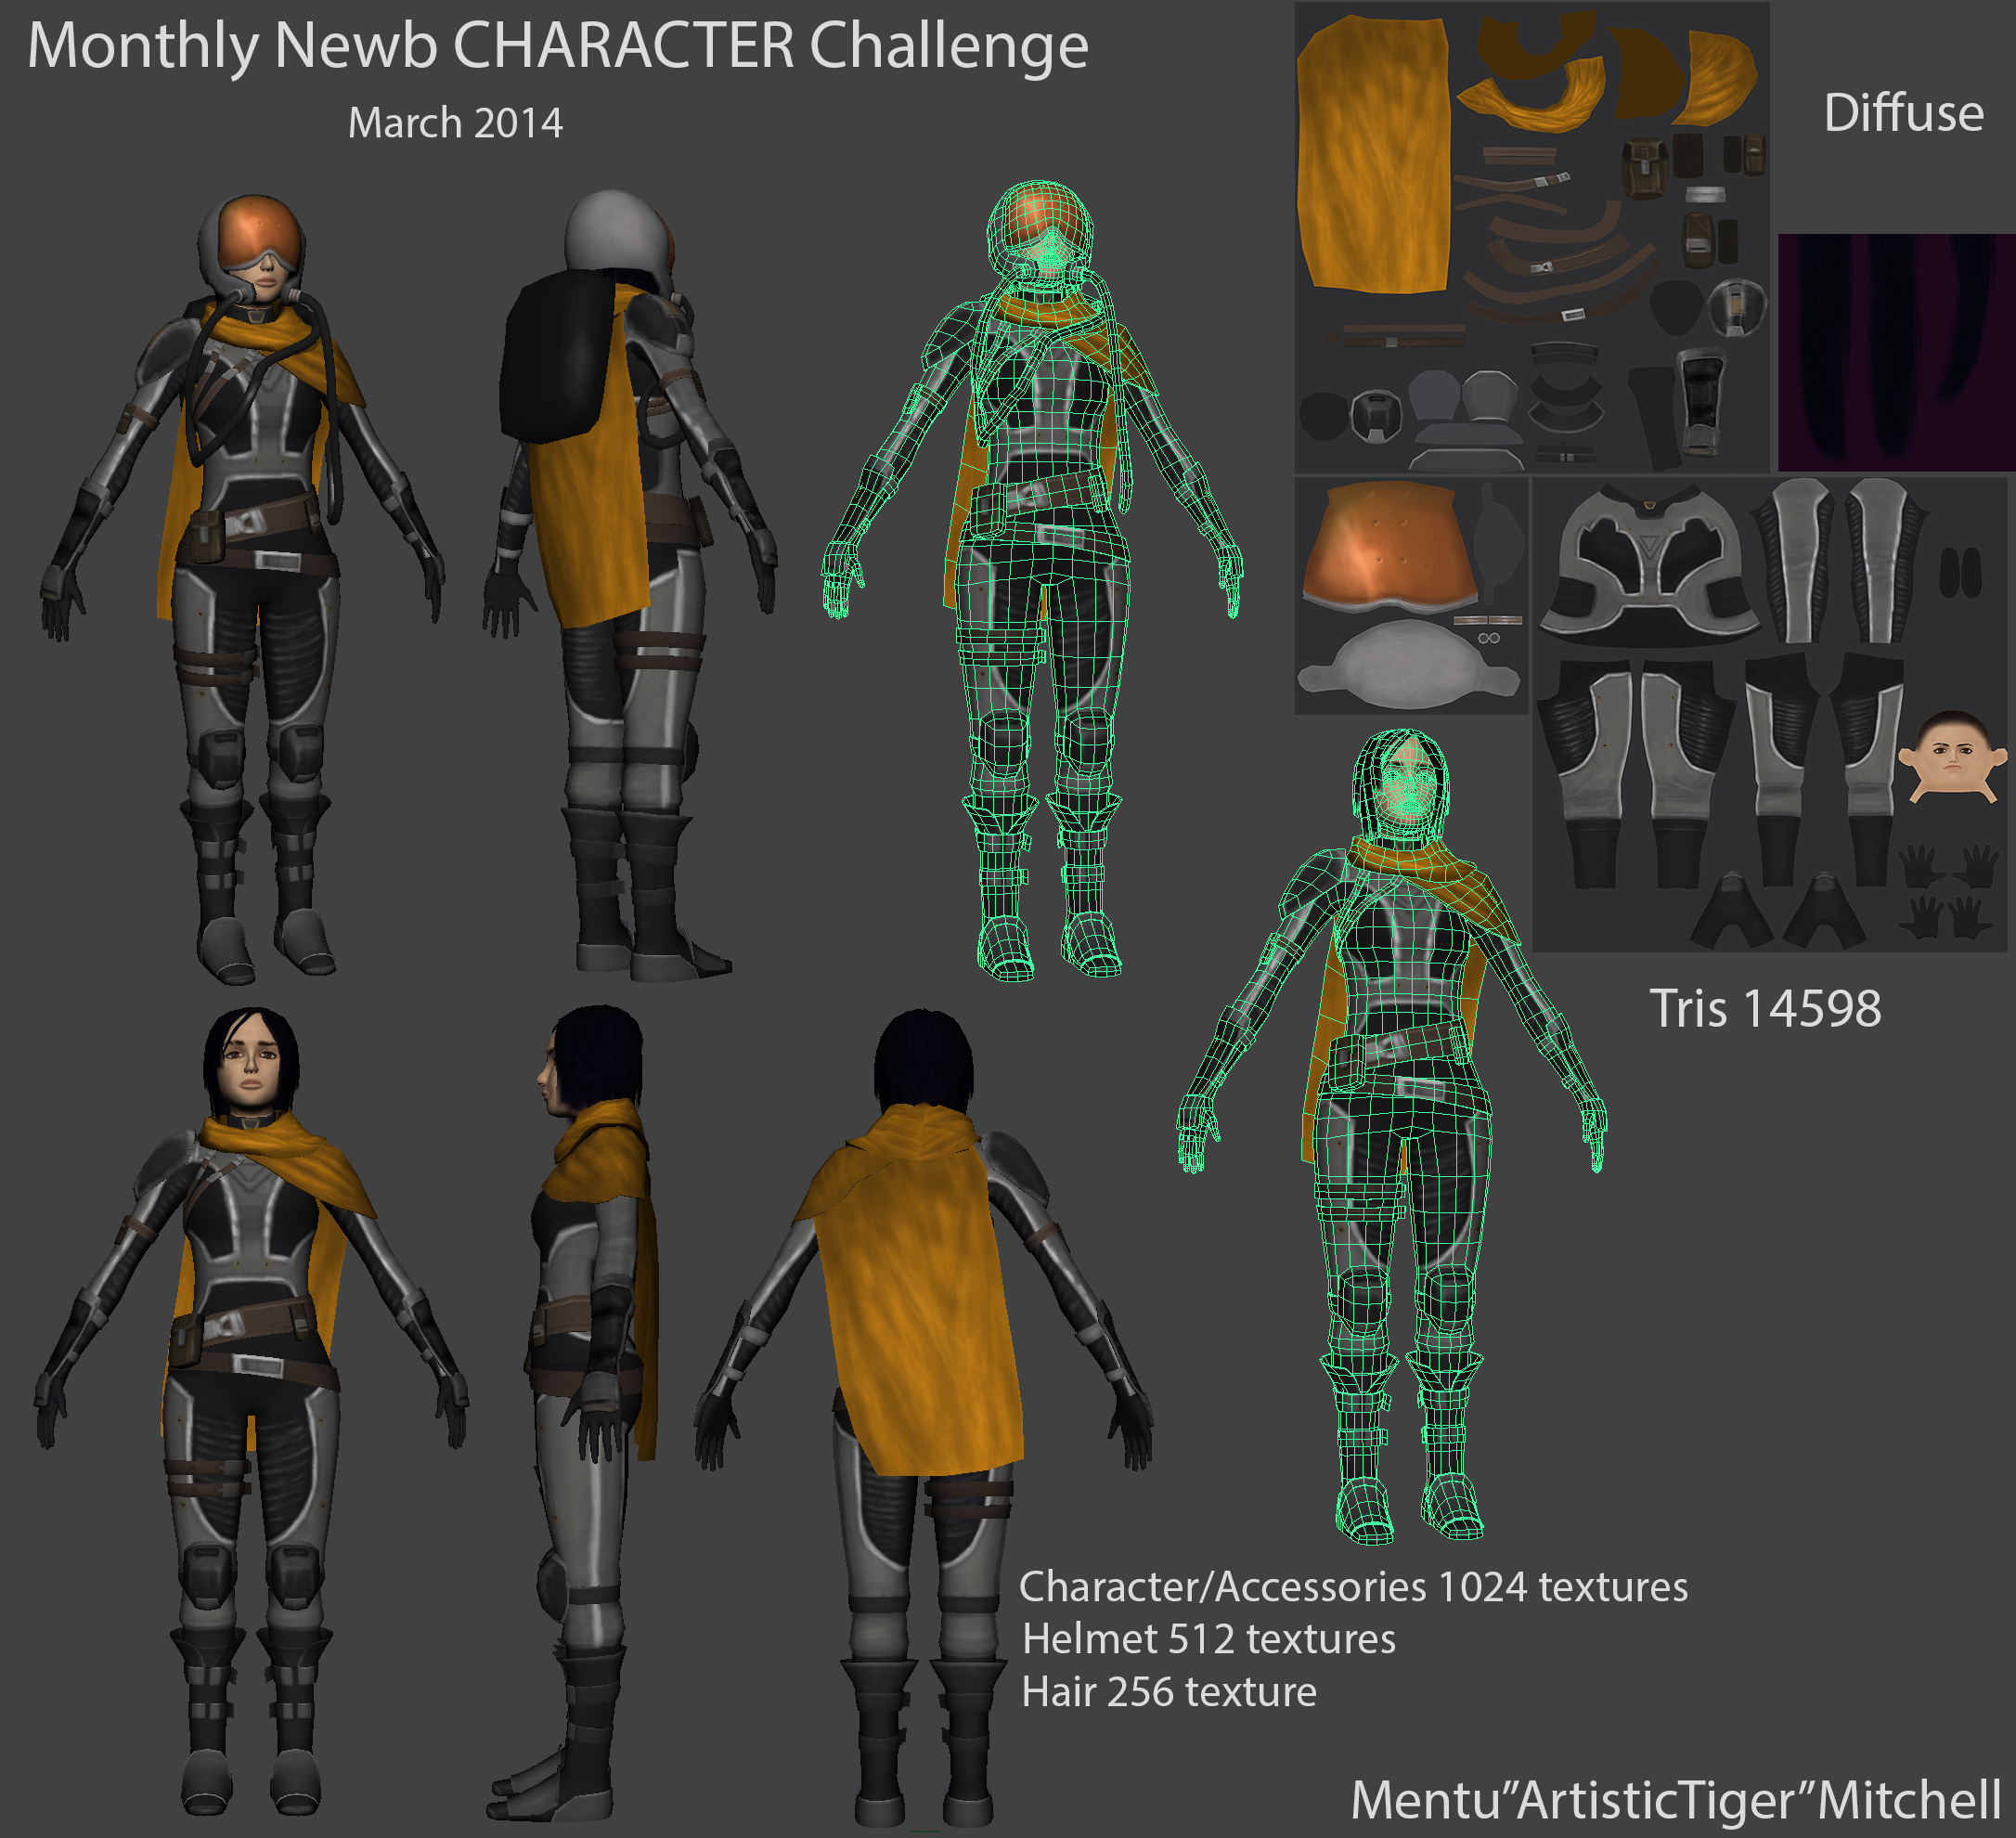 the_monthly_newb_character_challenge___march_2014_by_theartistictiger-d7bmam8.jpg